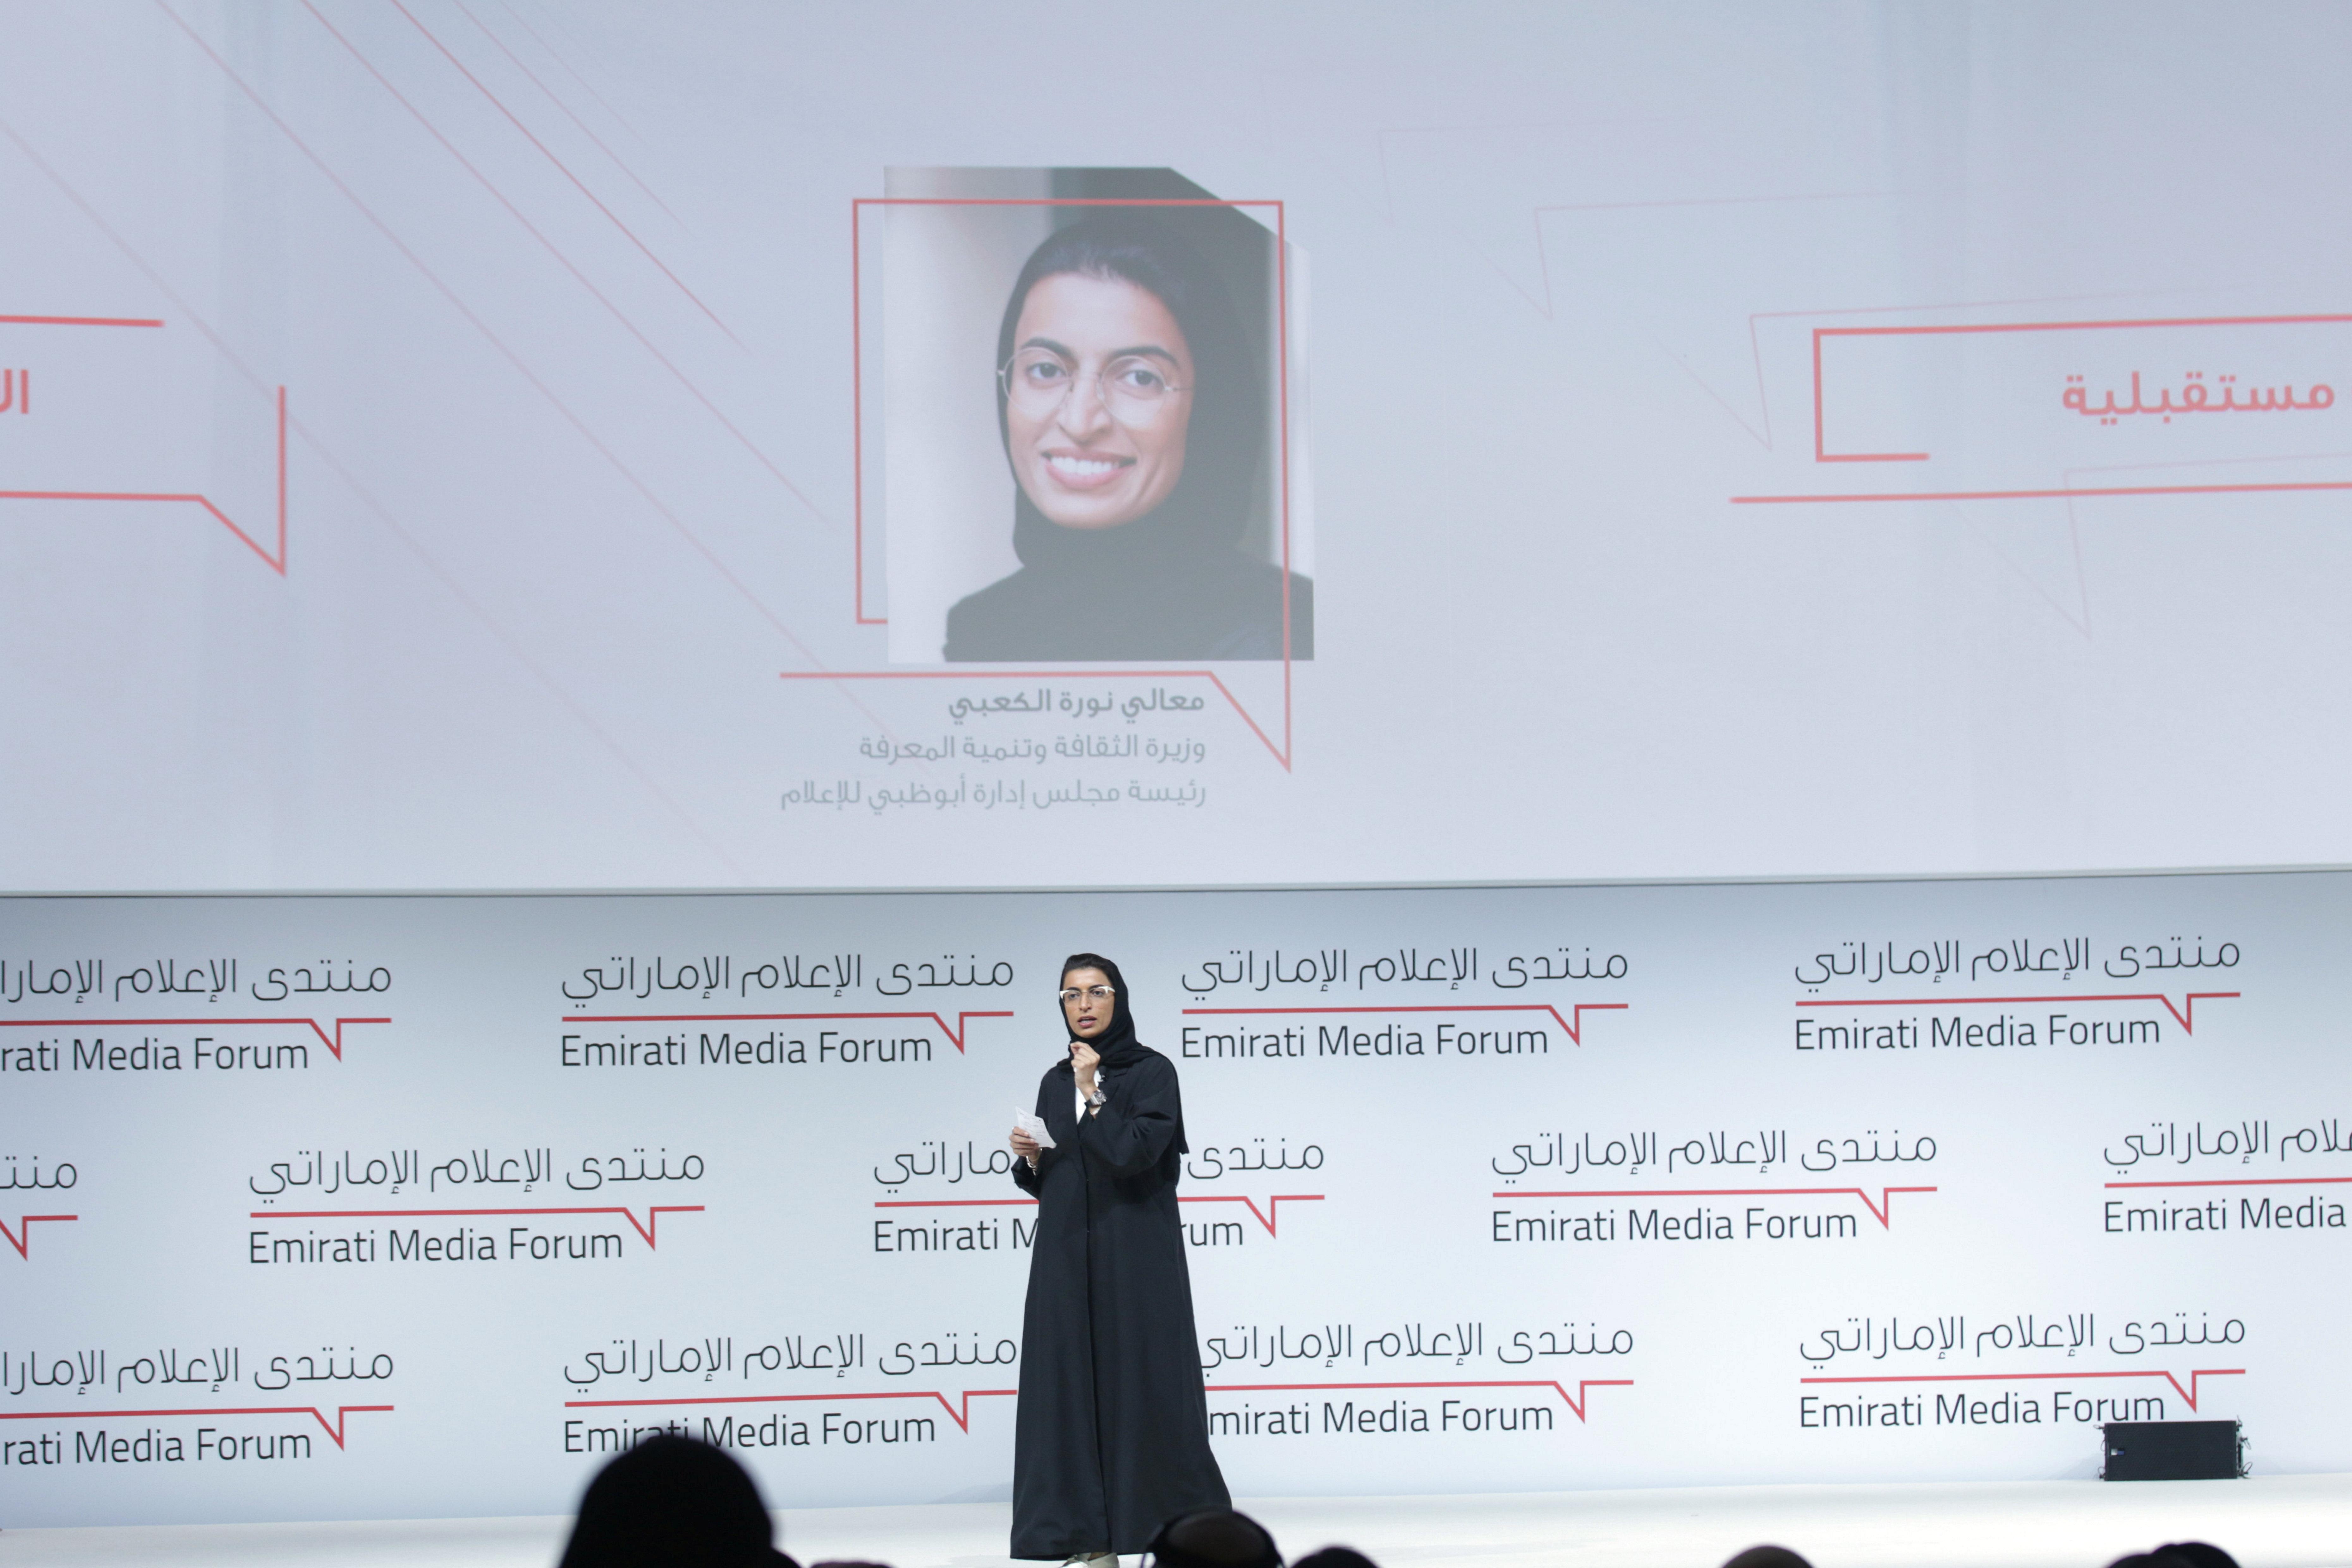 Dubai, UAE - November 6, 2017 - H.E. Noura Al Kaabi, Minister of Culture & Knowledge Development and Chairperson of Abu Dhabi Media speaks about media innovation at the Emirates Media Forum in Dubai  - Navin Khianey for The National